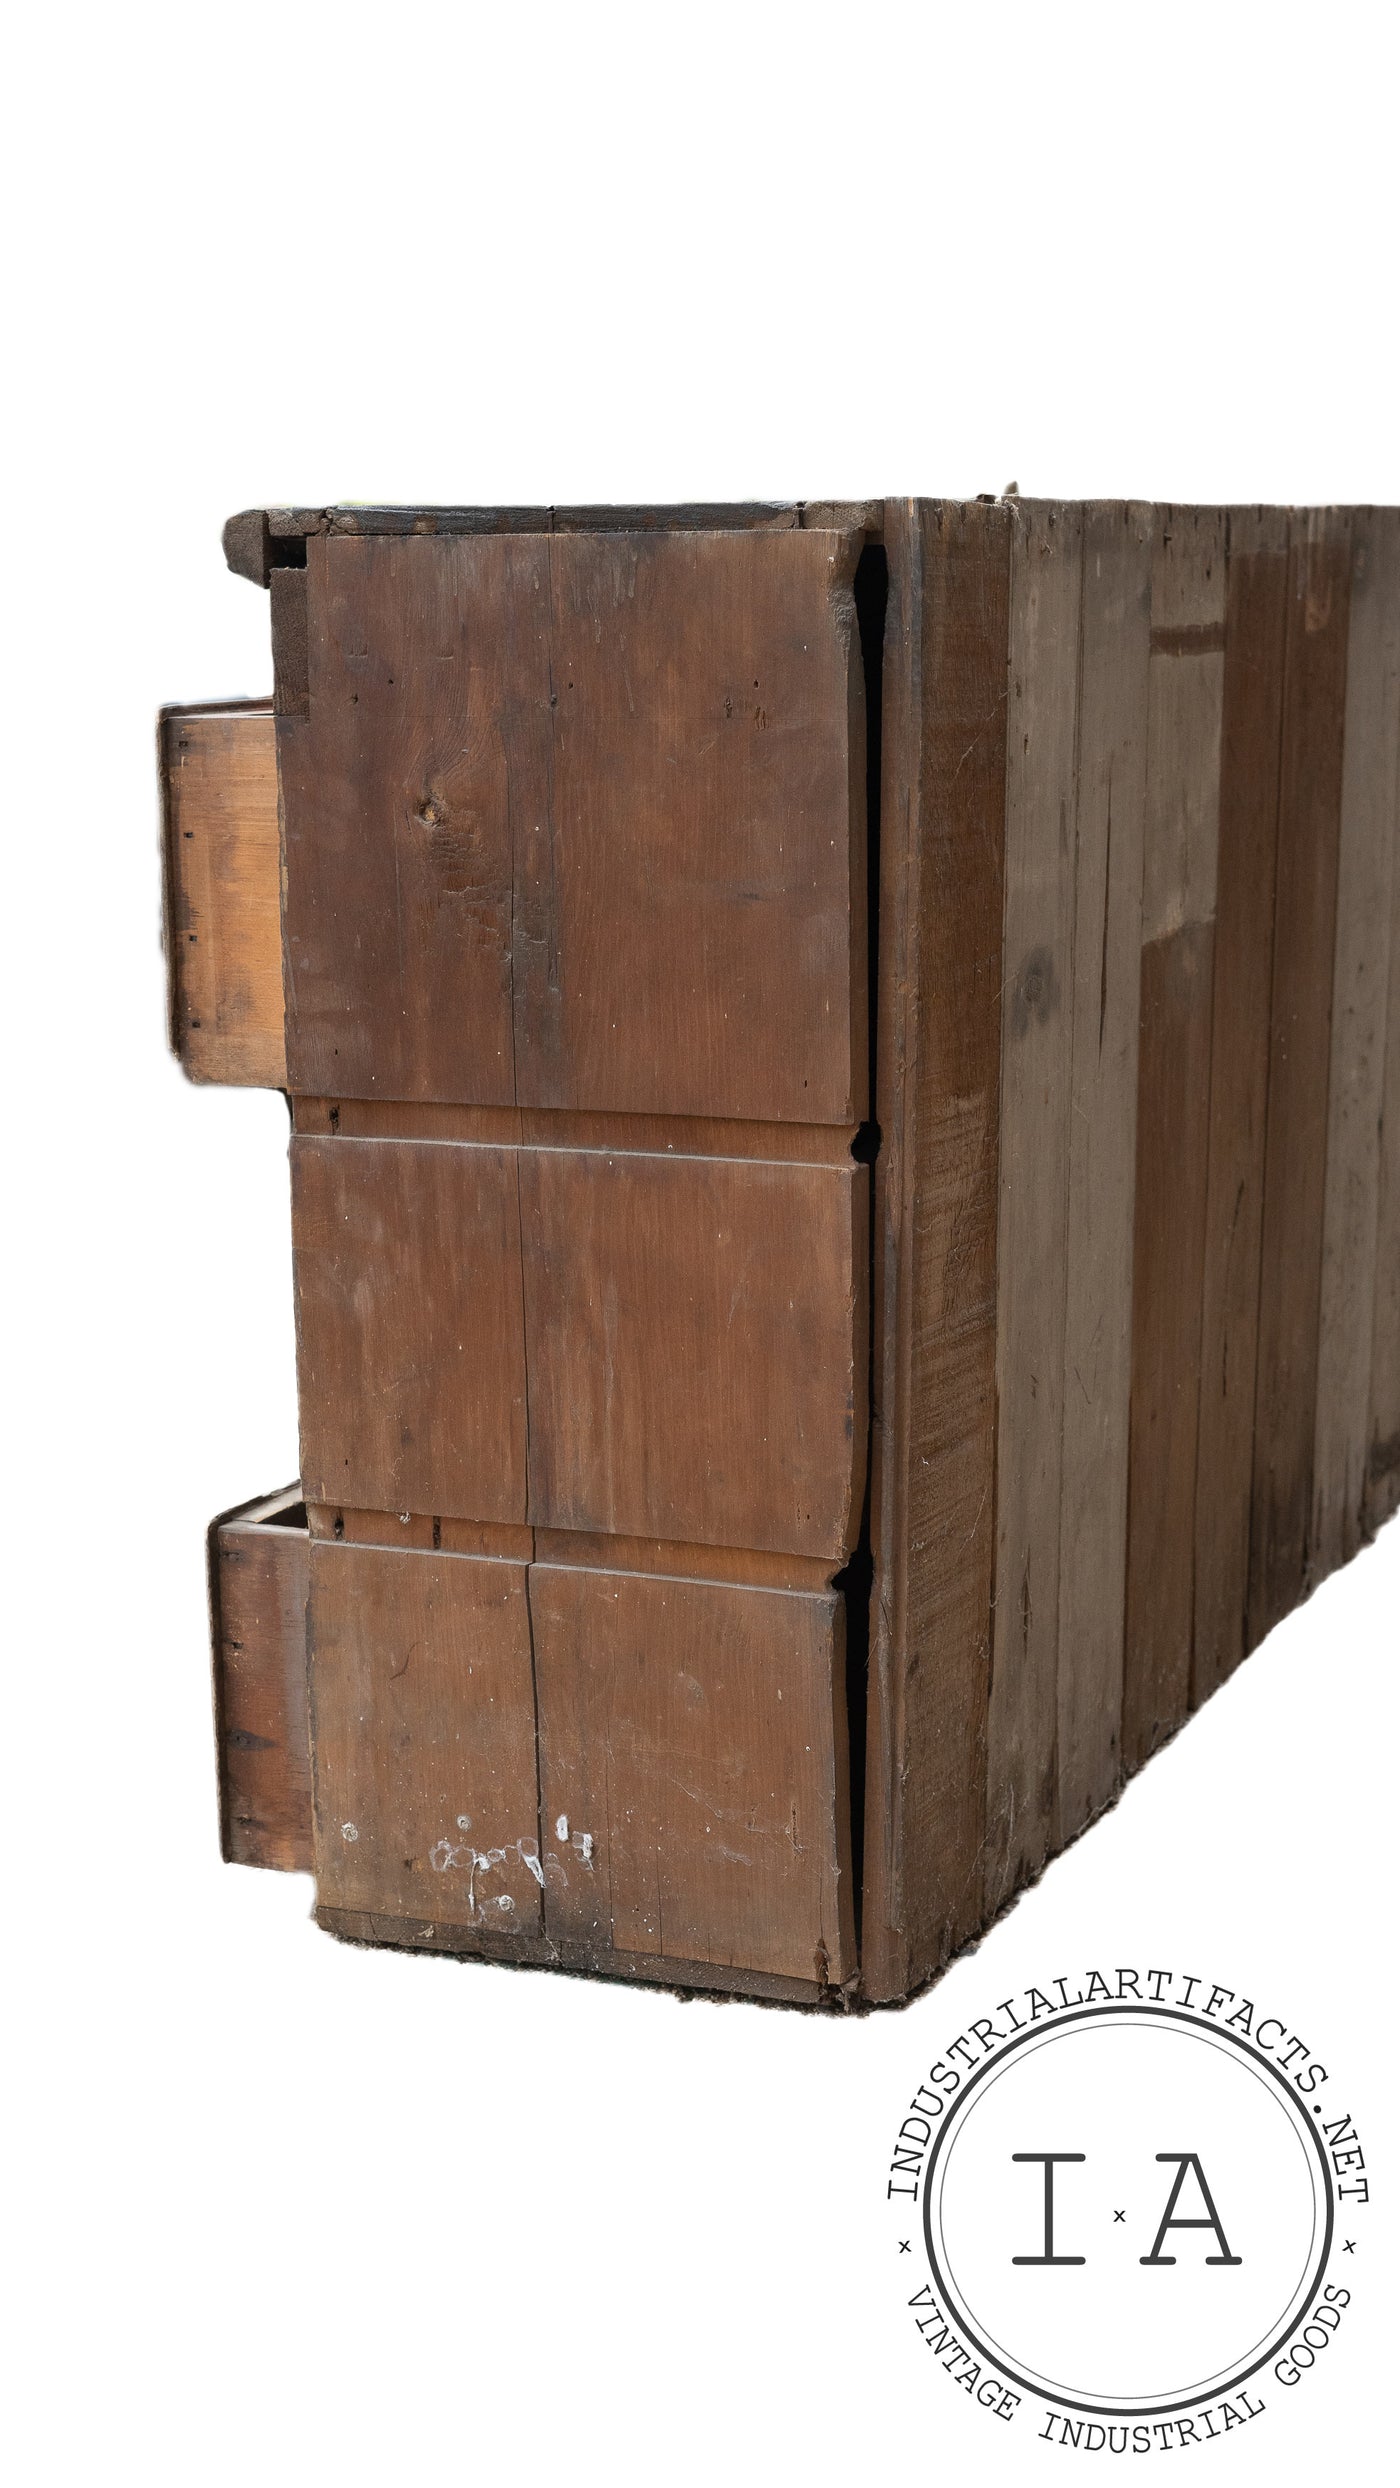 Early 1800s Apothecary Cabinet In Original Condition